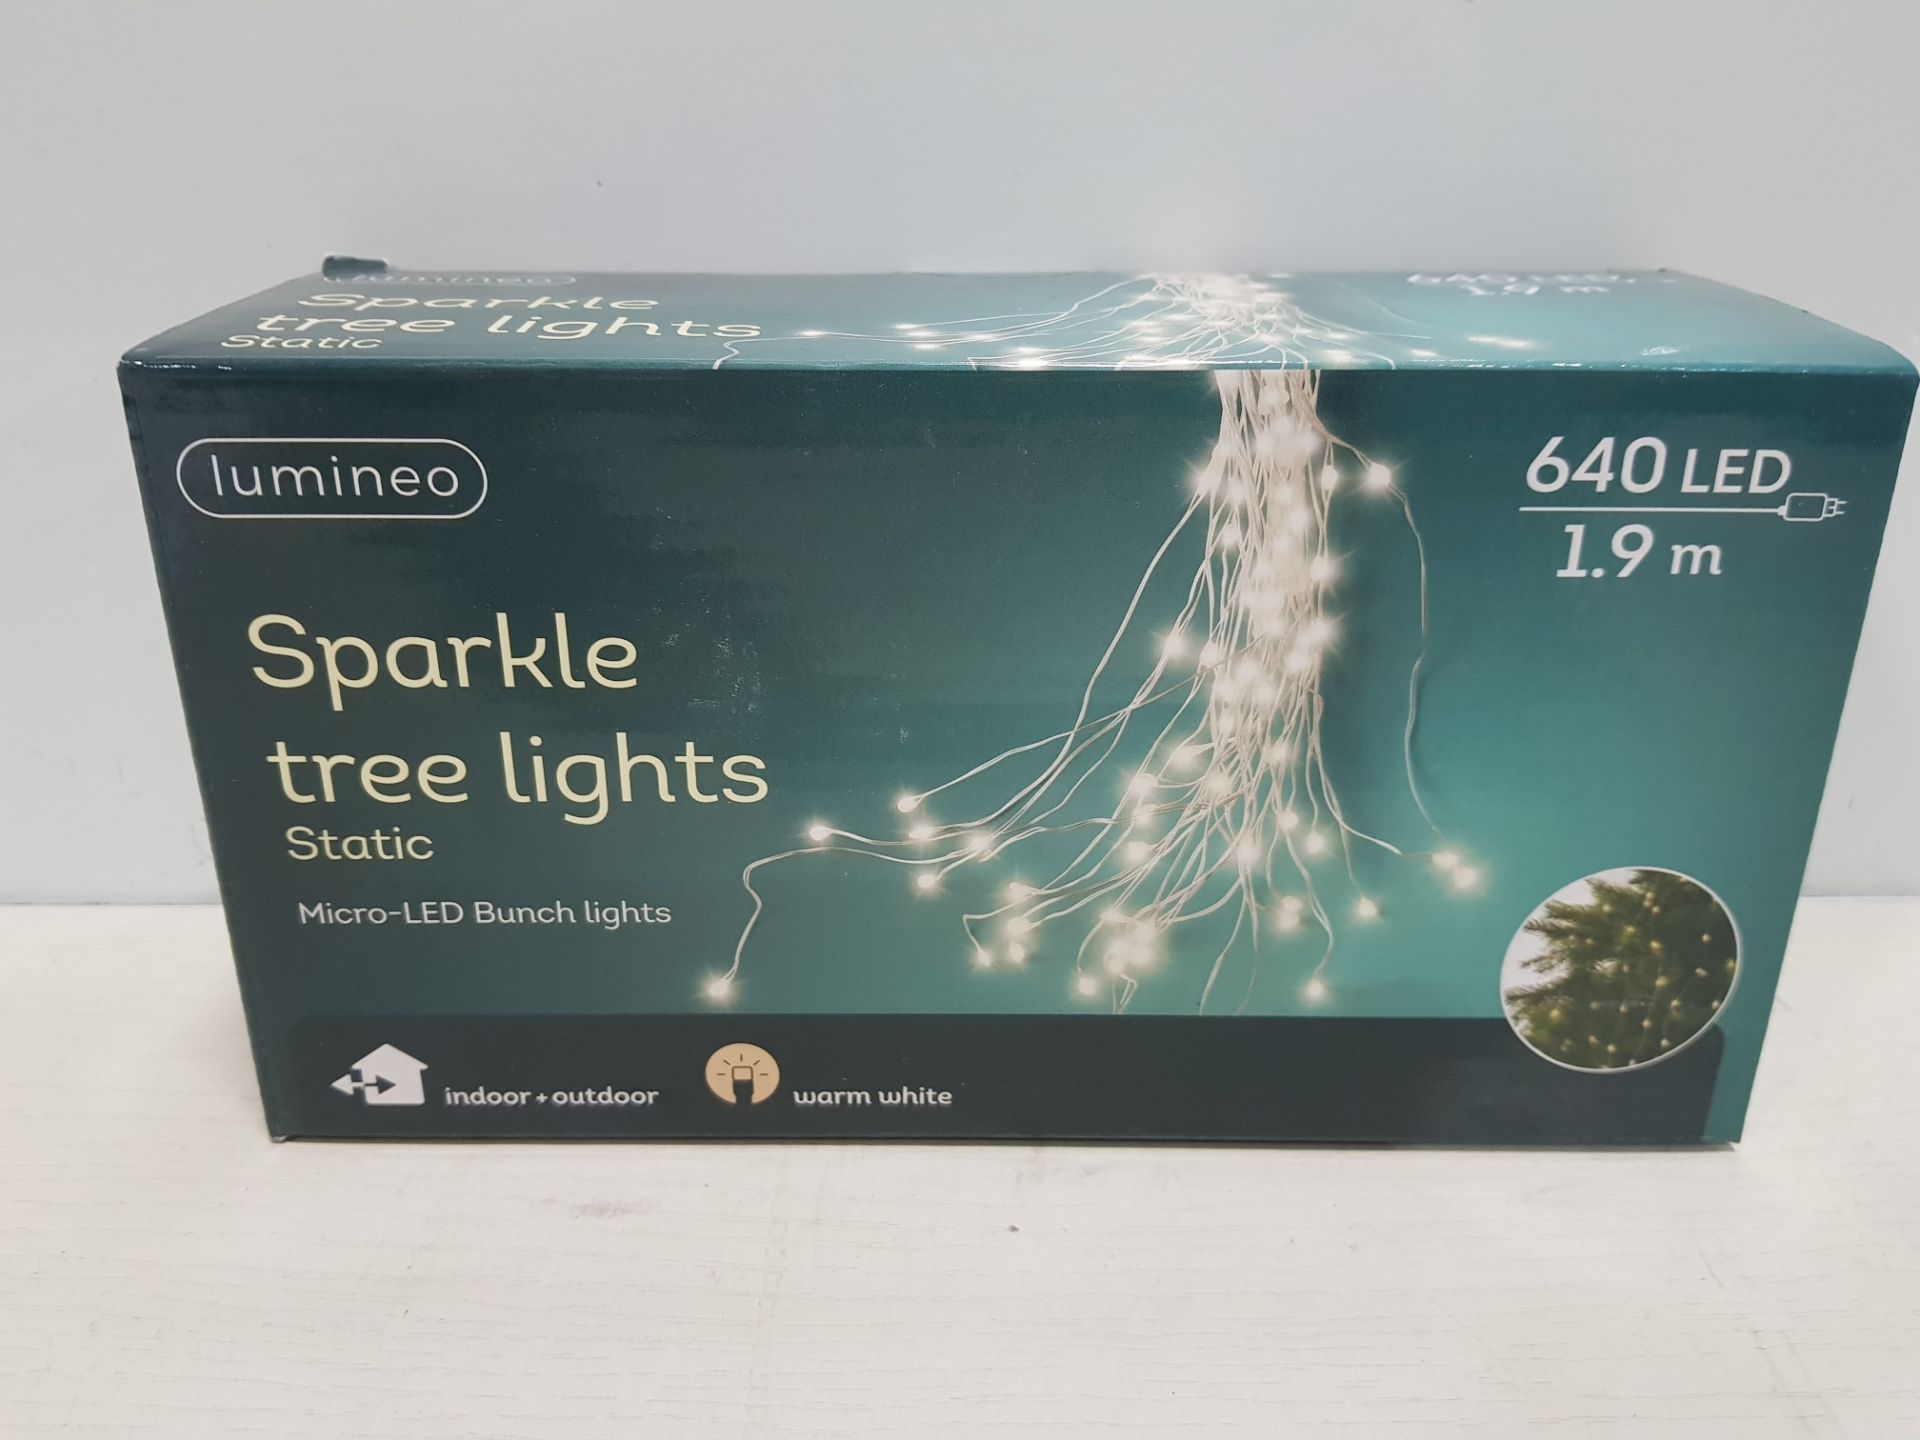 20 X LUMINEO 640 LED SPARKLE TREE LIGHTS - STATIC - MICRO LED BUNCH LIGHTS - IN WARM WHITE